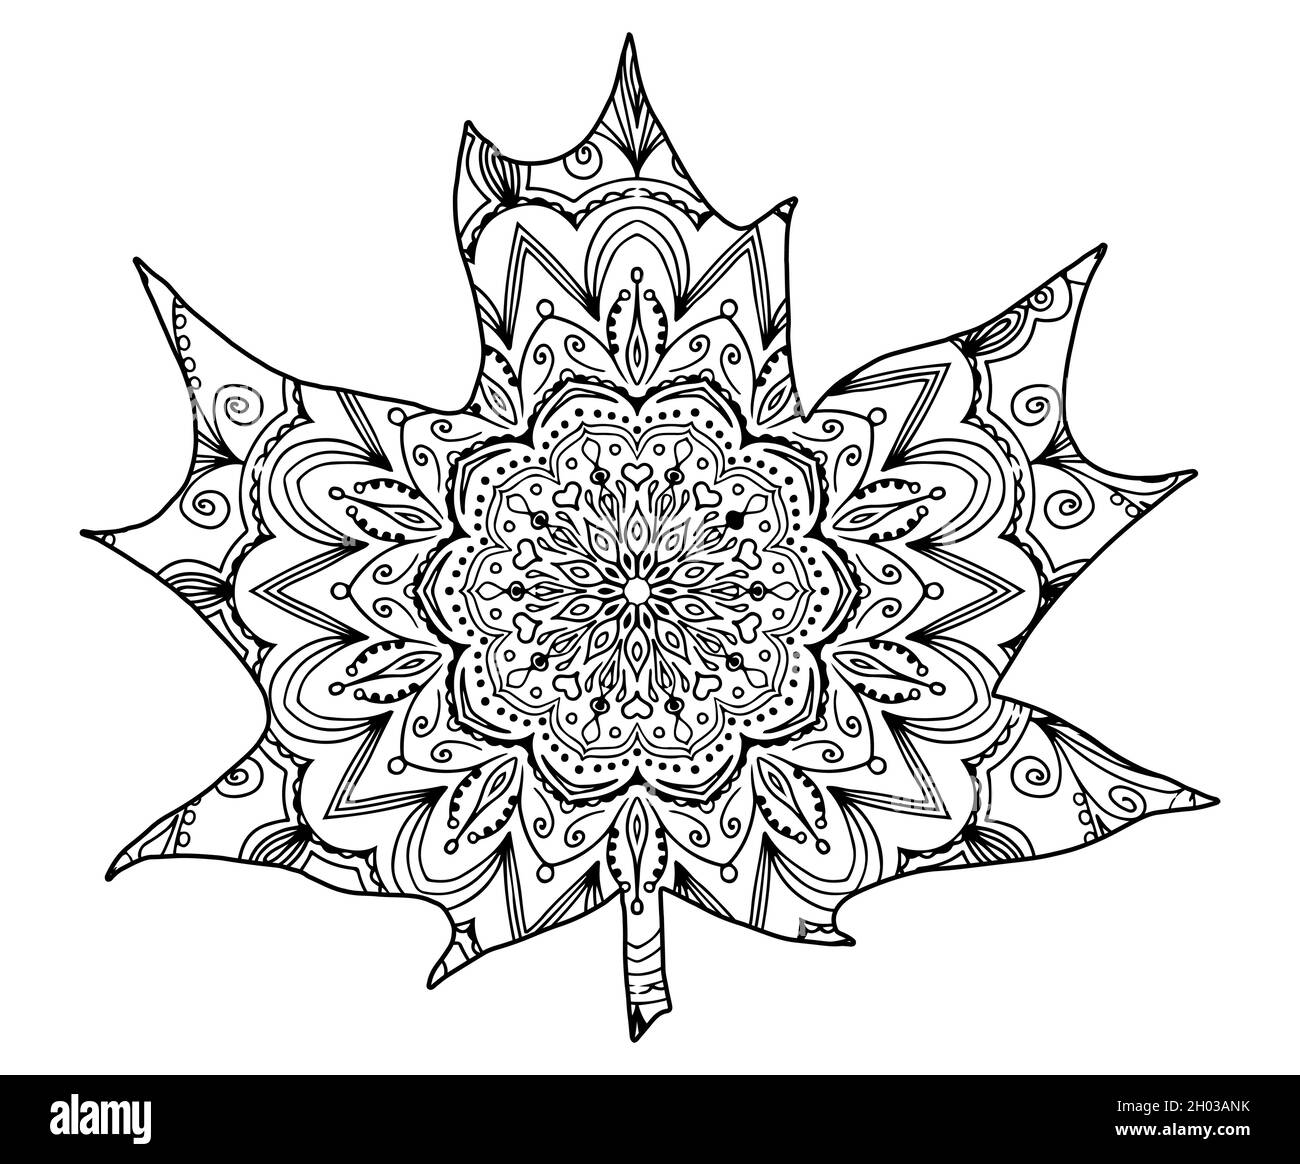 Coloring book page with decorative maple leaf on white background ...